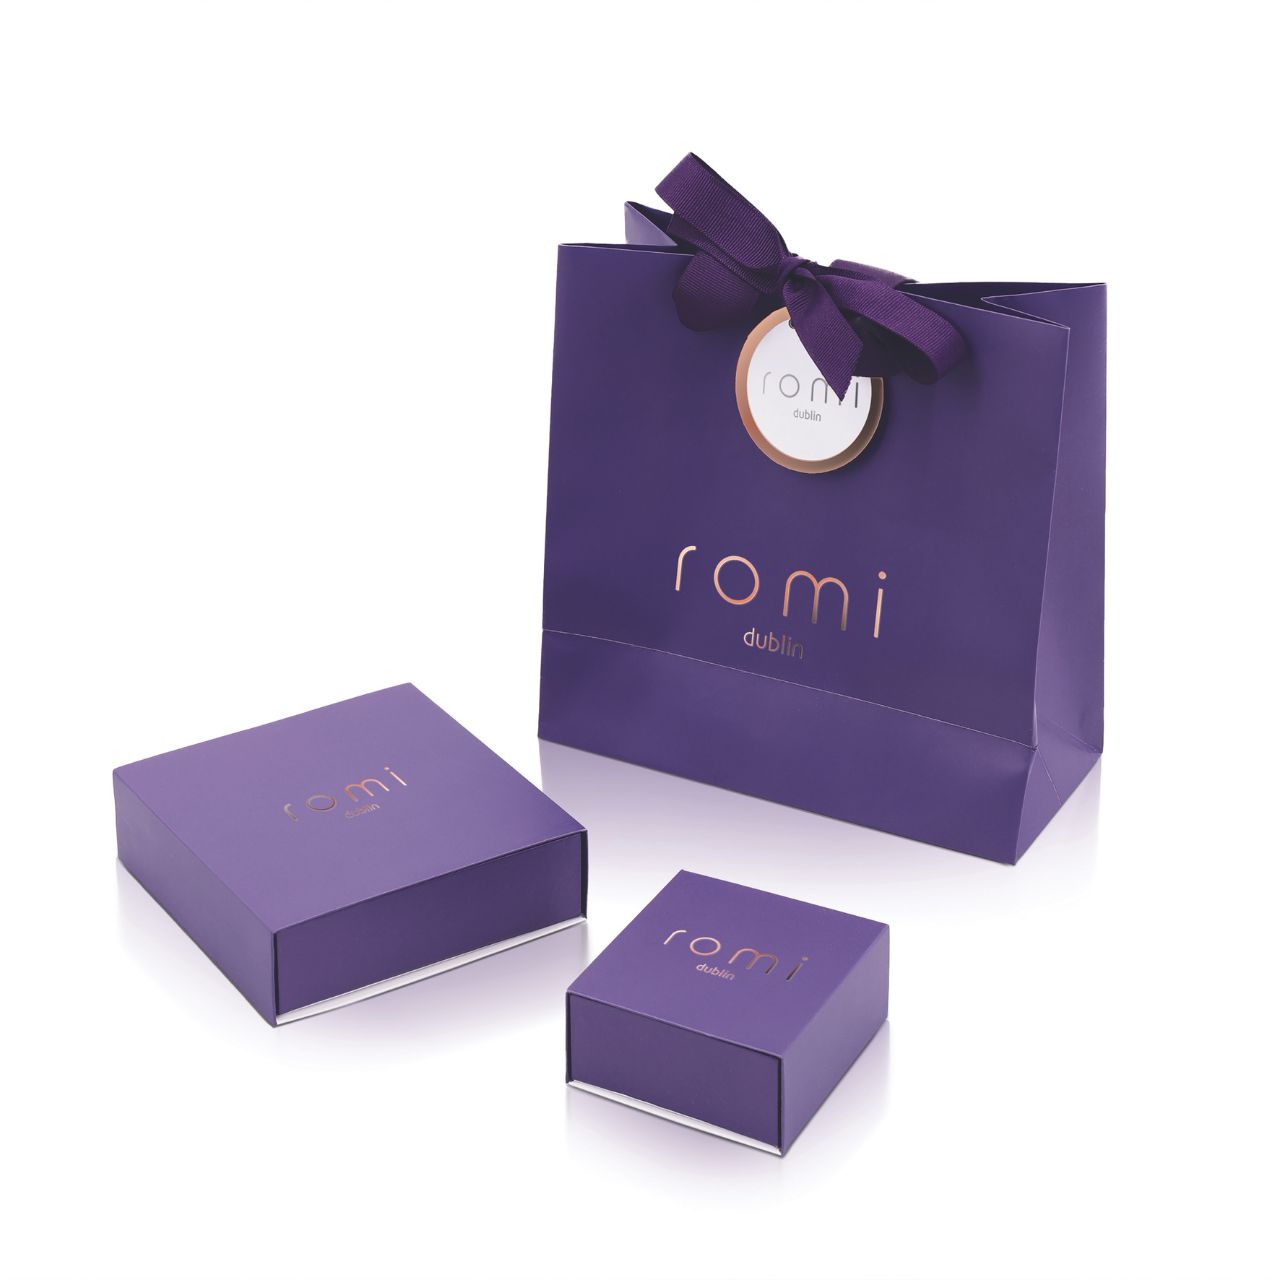 Romi Dublin Silver Pave Hoop & Stem Earrings  This easy-to-wear jewellery collection was inspired by daughter Romi who loves to style and accessorise. An outfit isn’t complete until the perfect pieces of jewellery and accessories have been selected to enhance it.